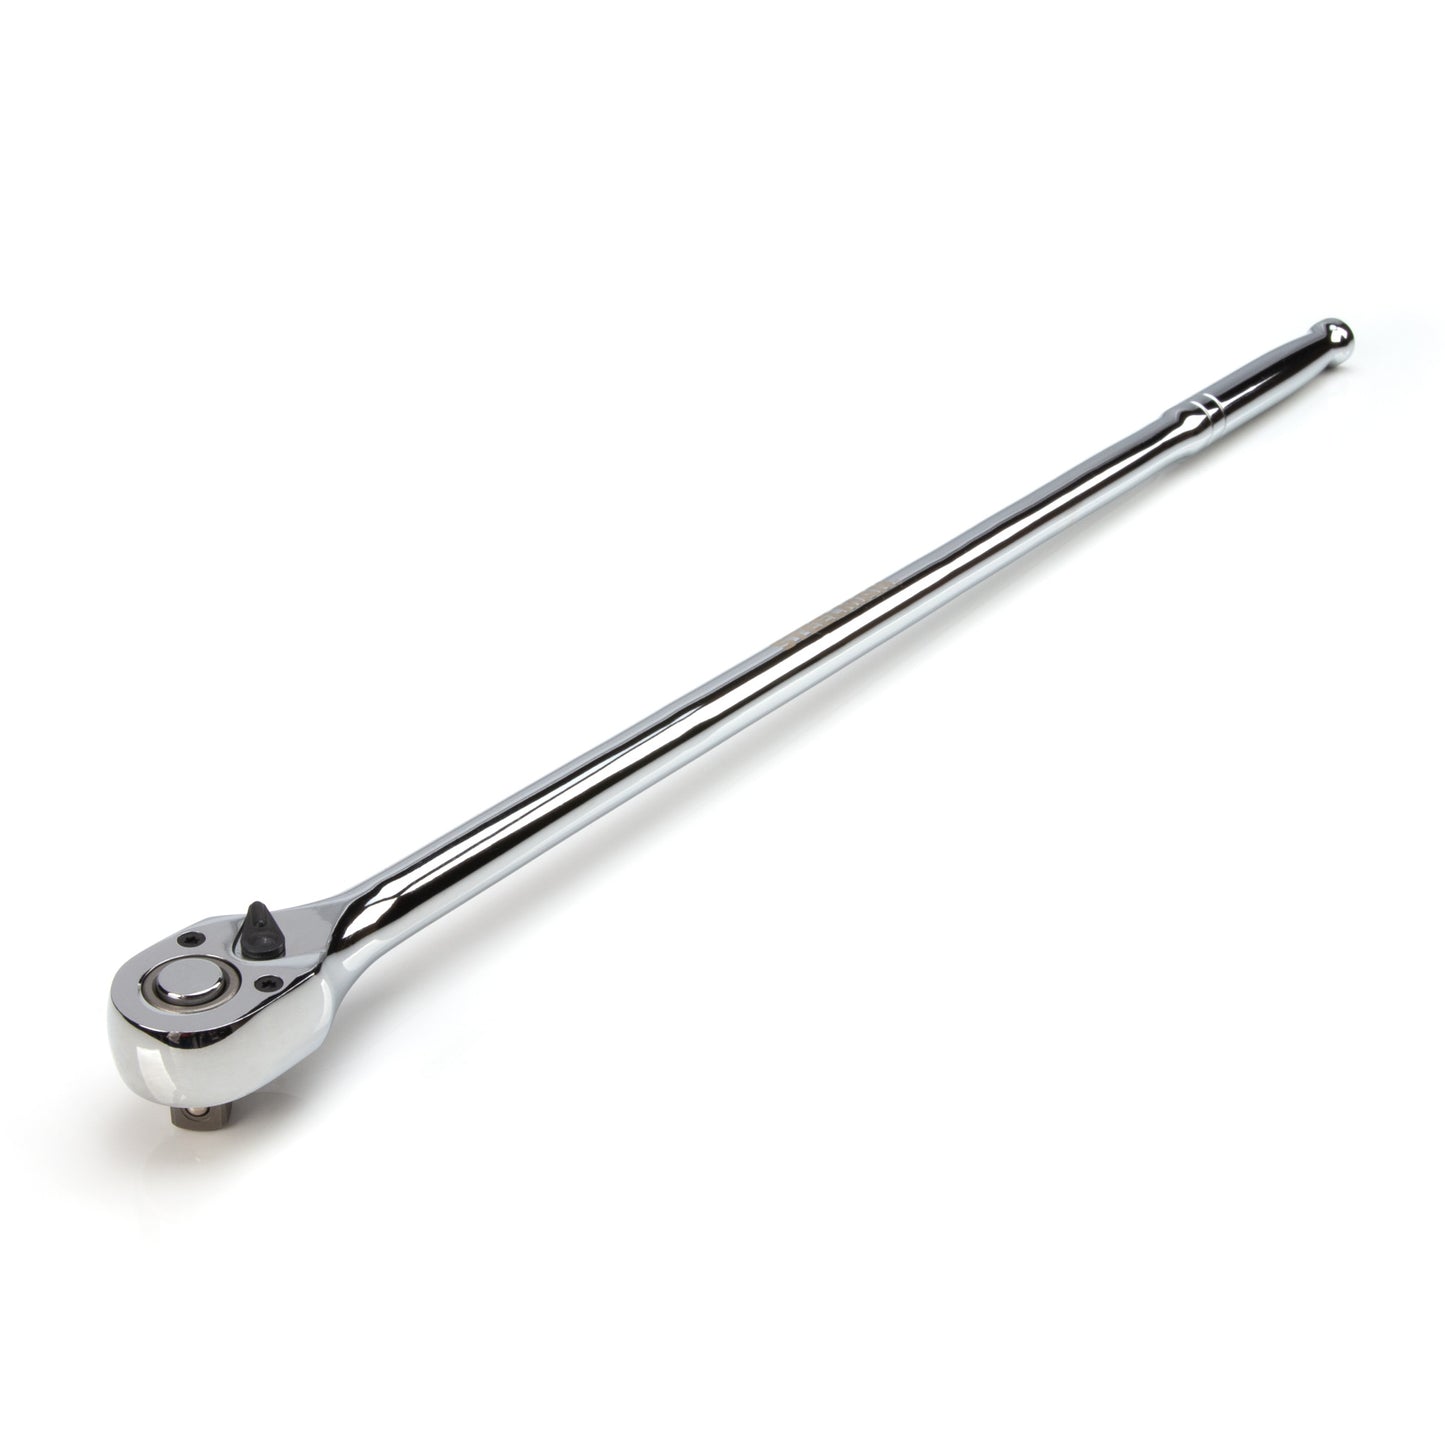 1/2-Inch Drive 72-Tooth Reversible Quick-Release Ratchet with 24-Inch Long Full Polish Handle